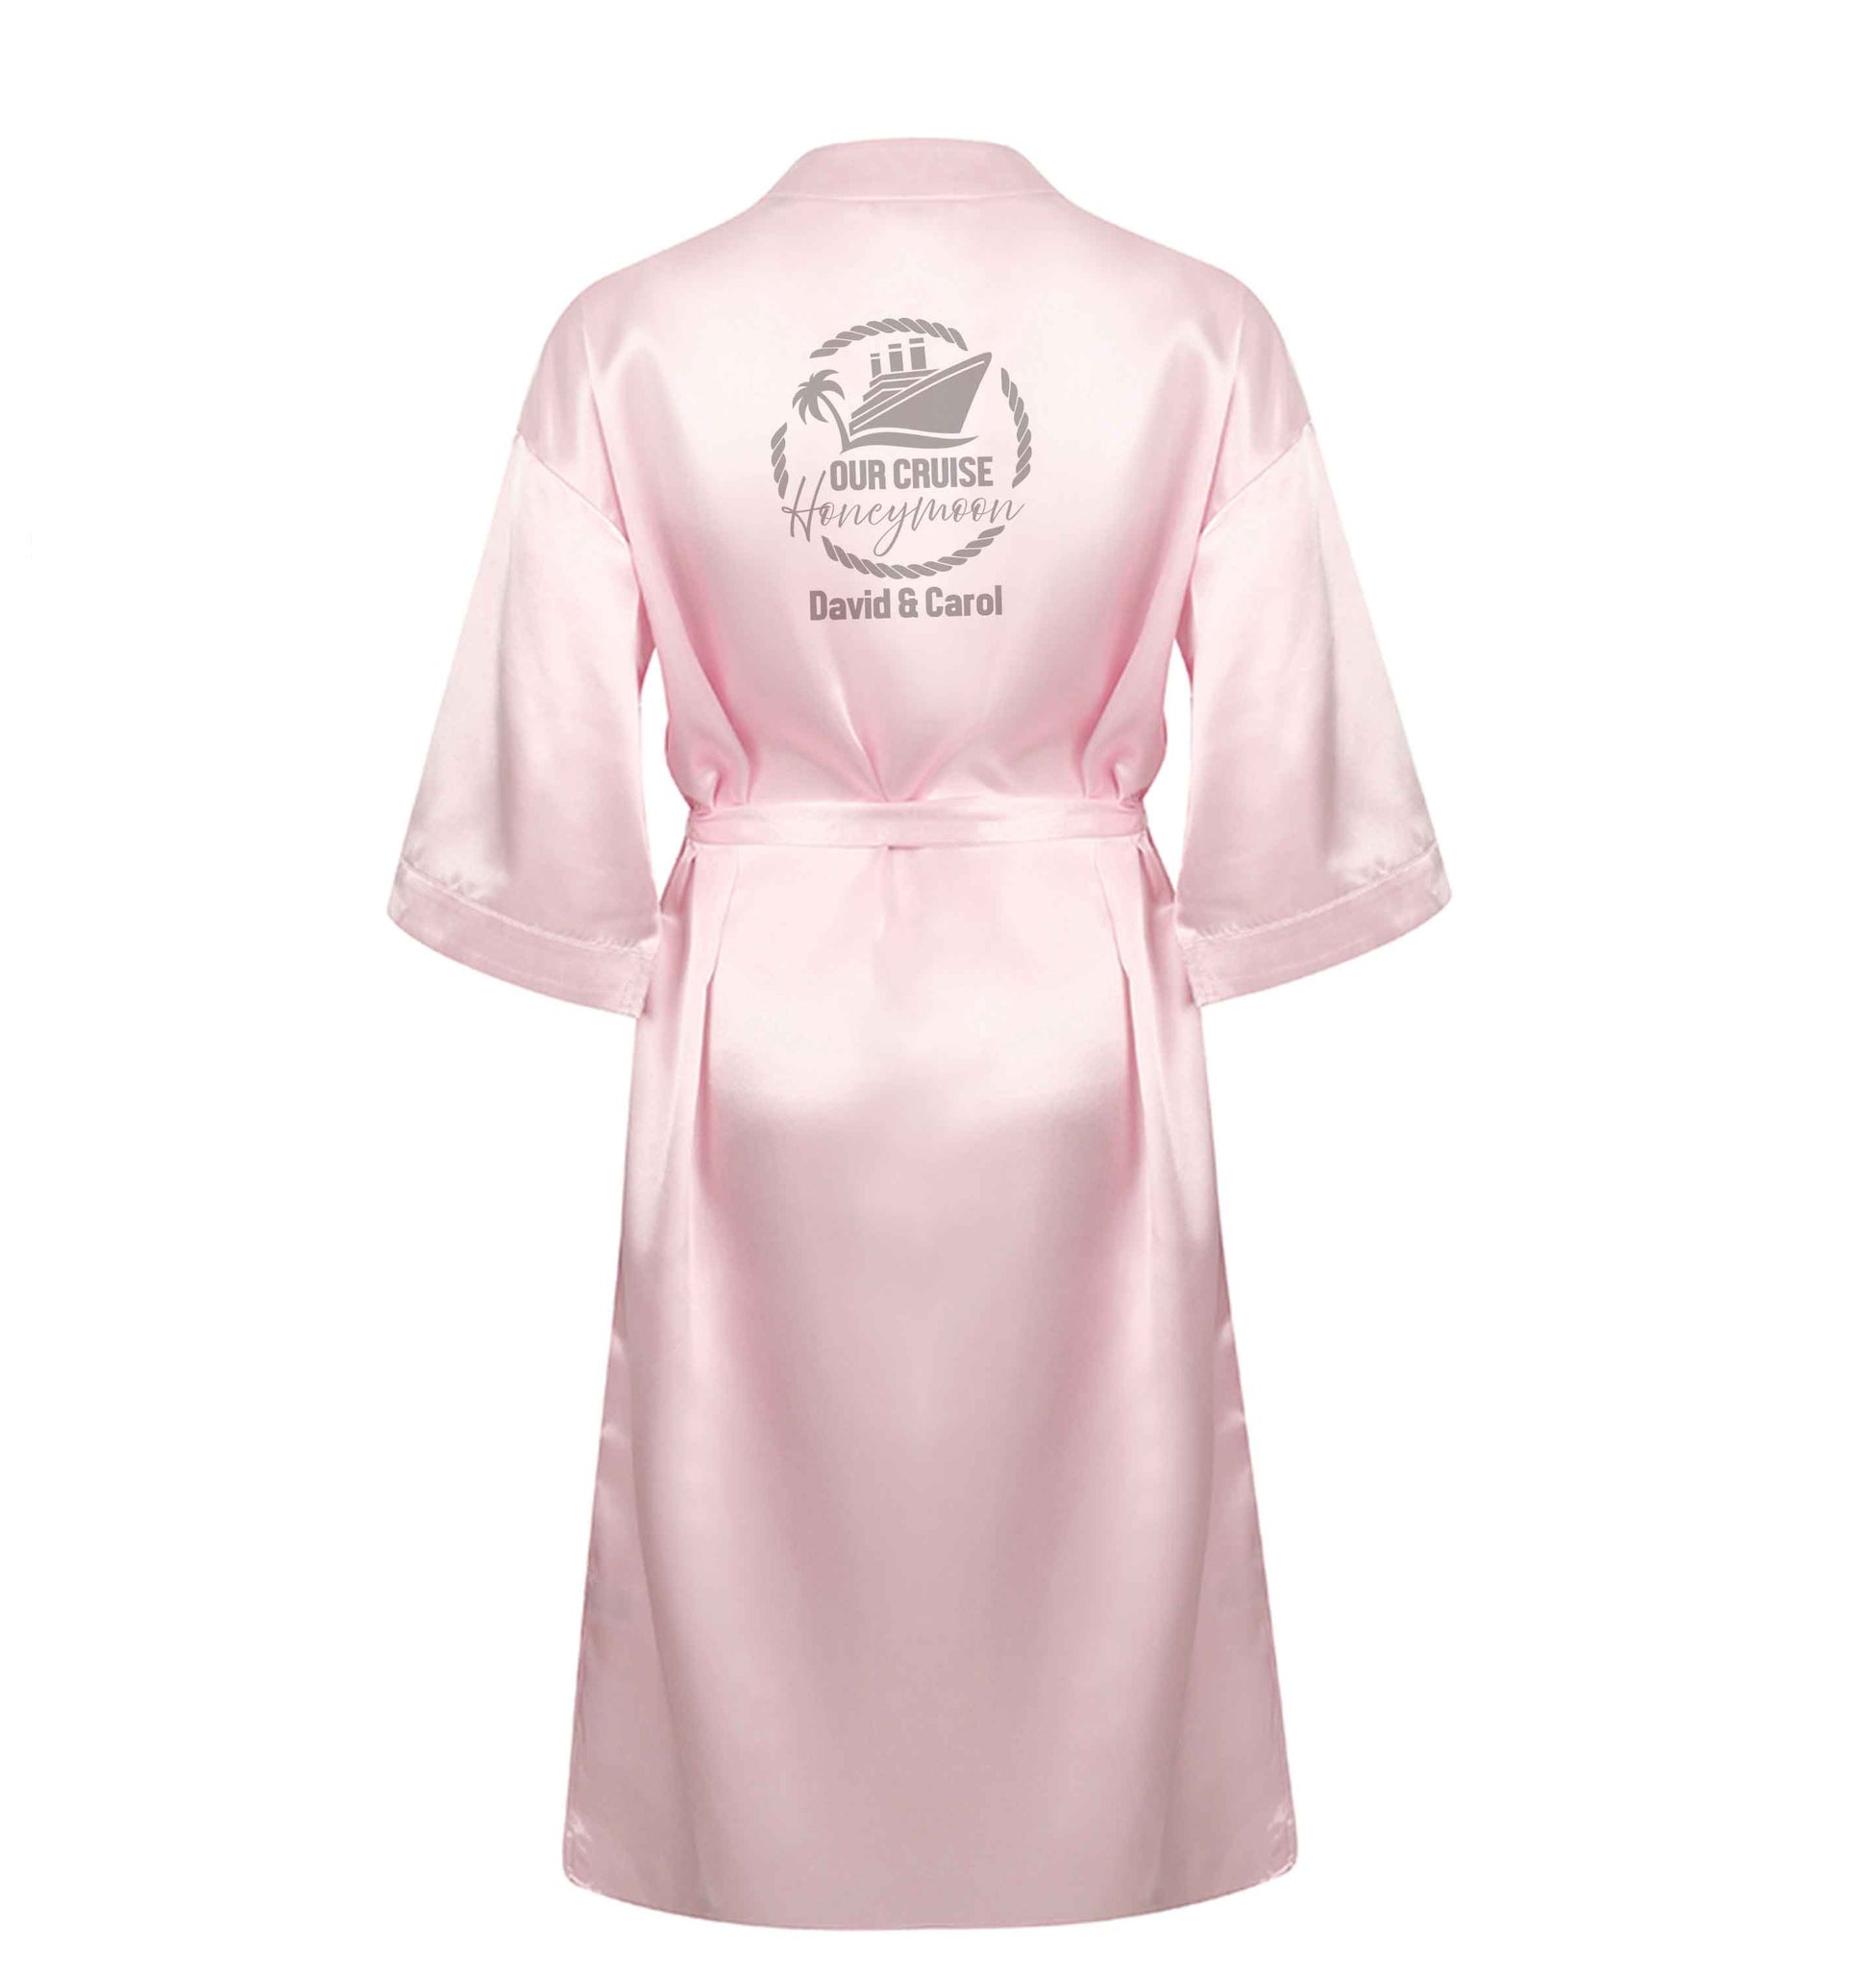 Our cruise honeymoon personalised XL/XXL pink ladies dressing gown size 16/18